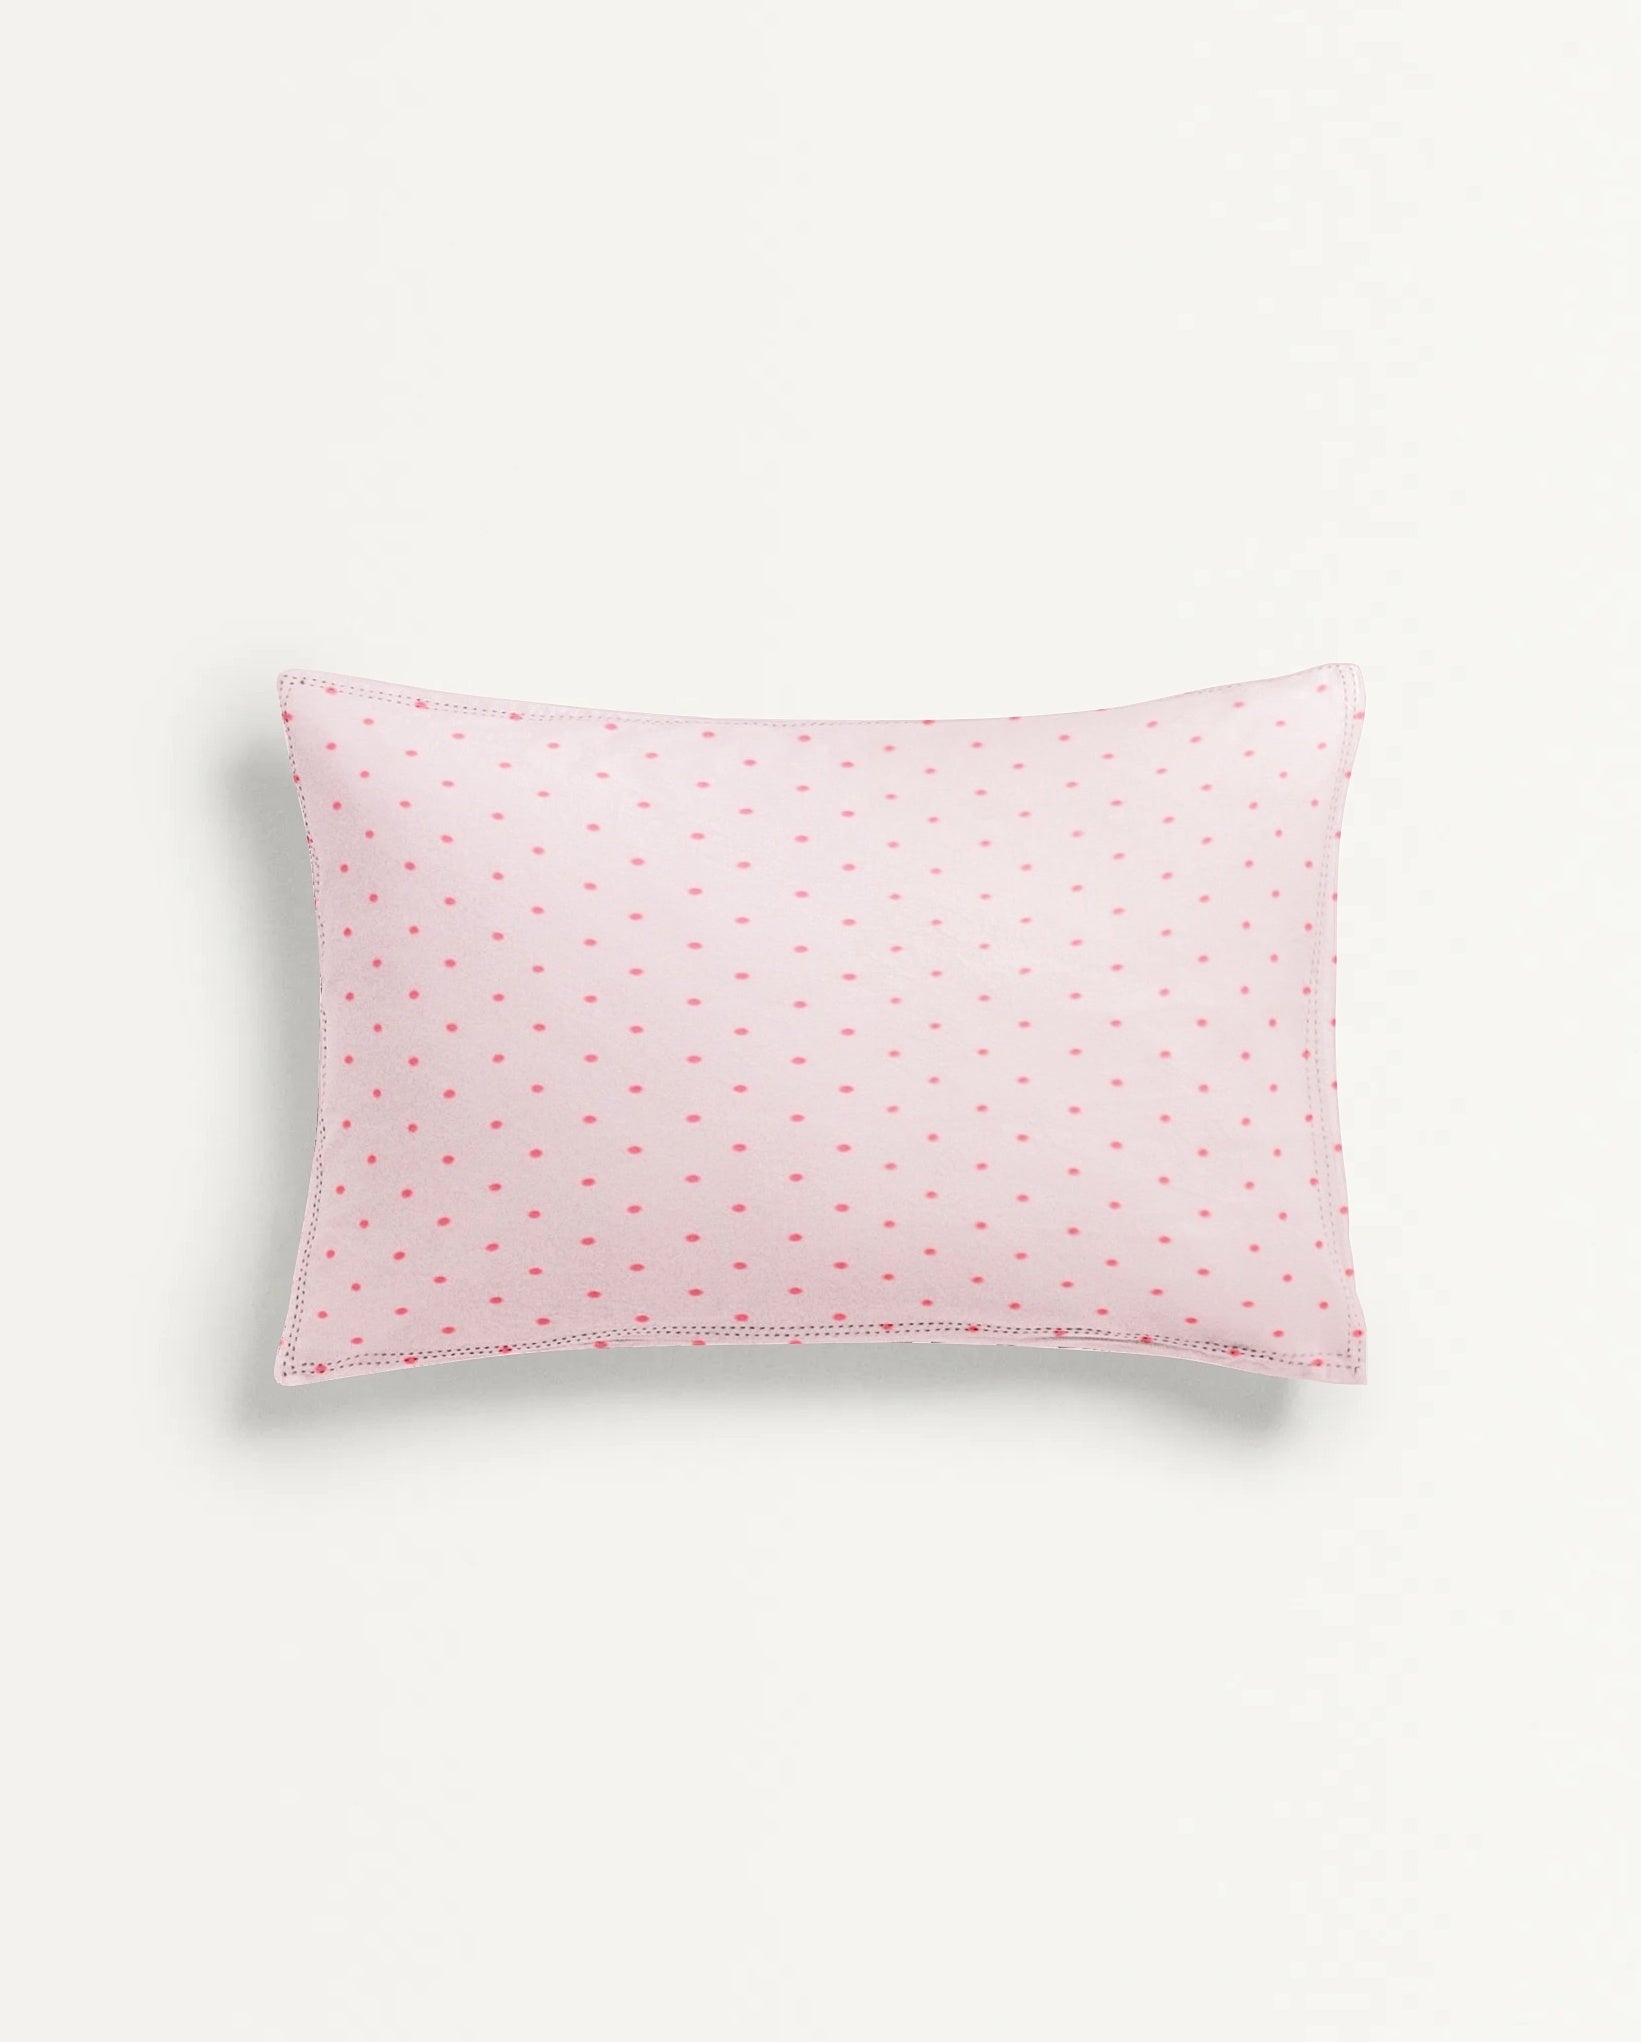 ‘Pink on Pink’ Organic Baby Pillow Cover